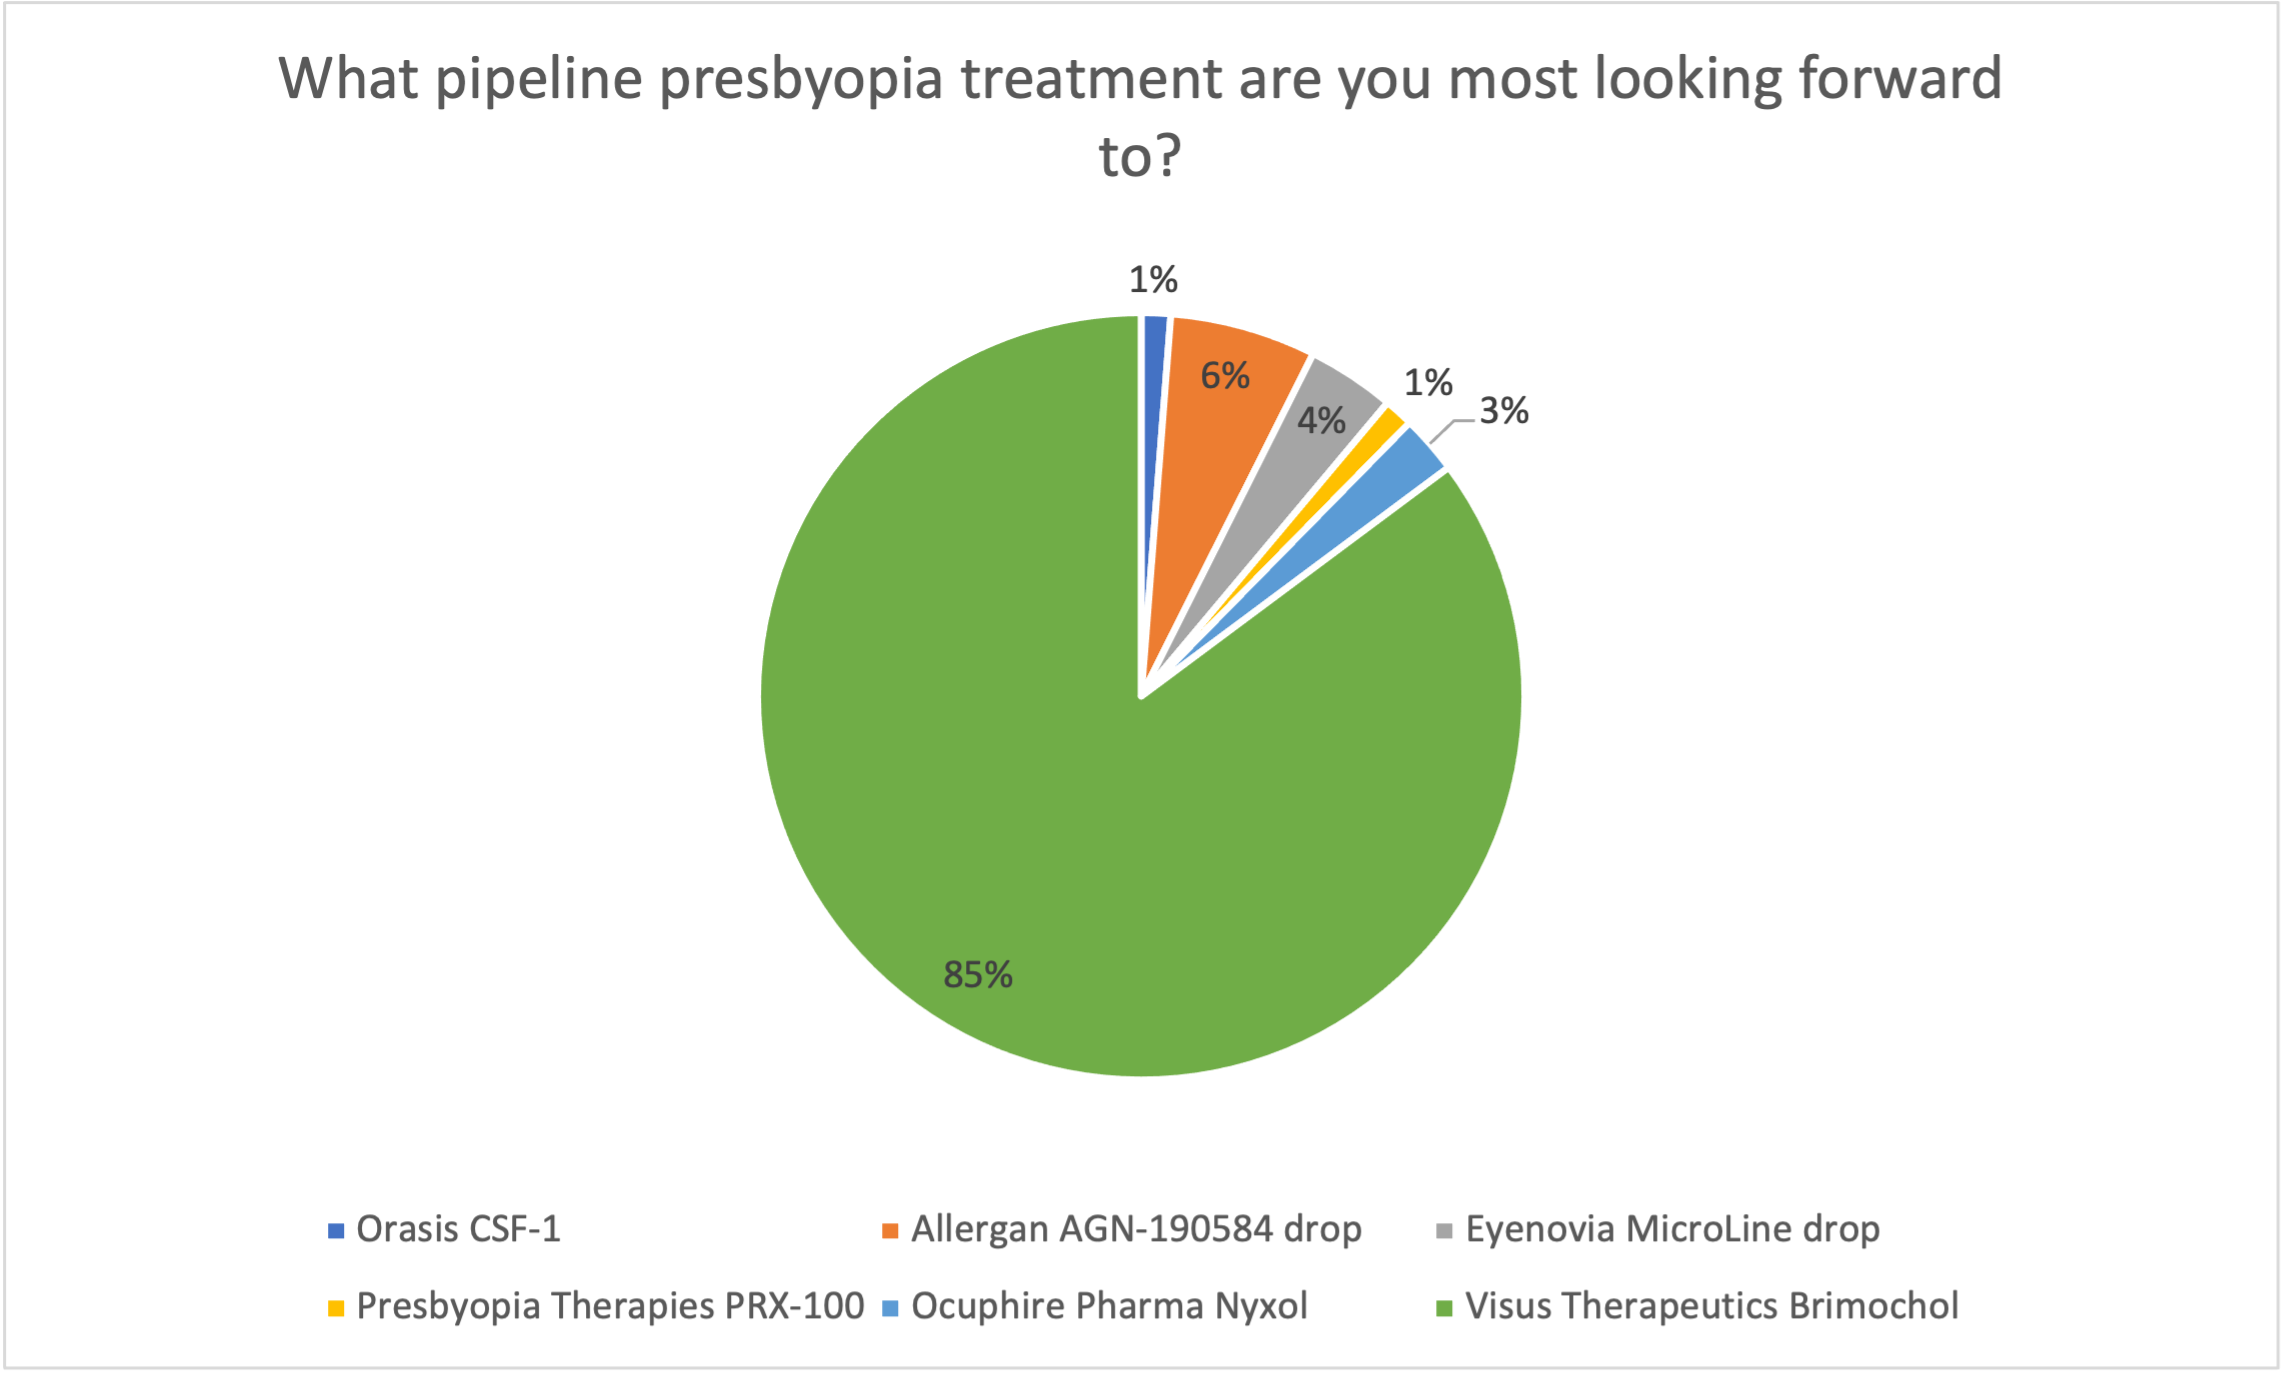 Poll results: What pipeline presbyopia treatment are you most looking forward to?